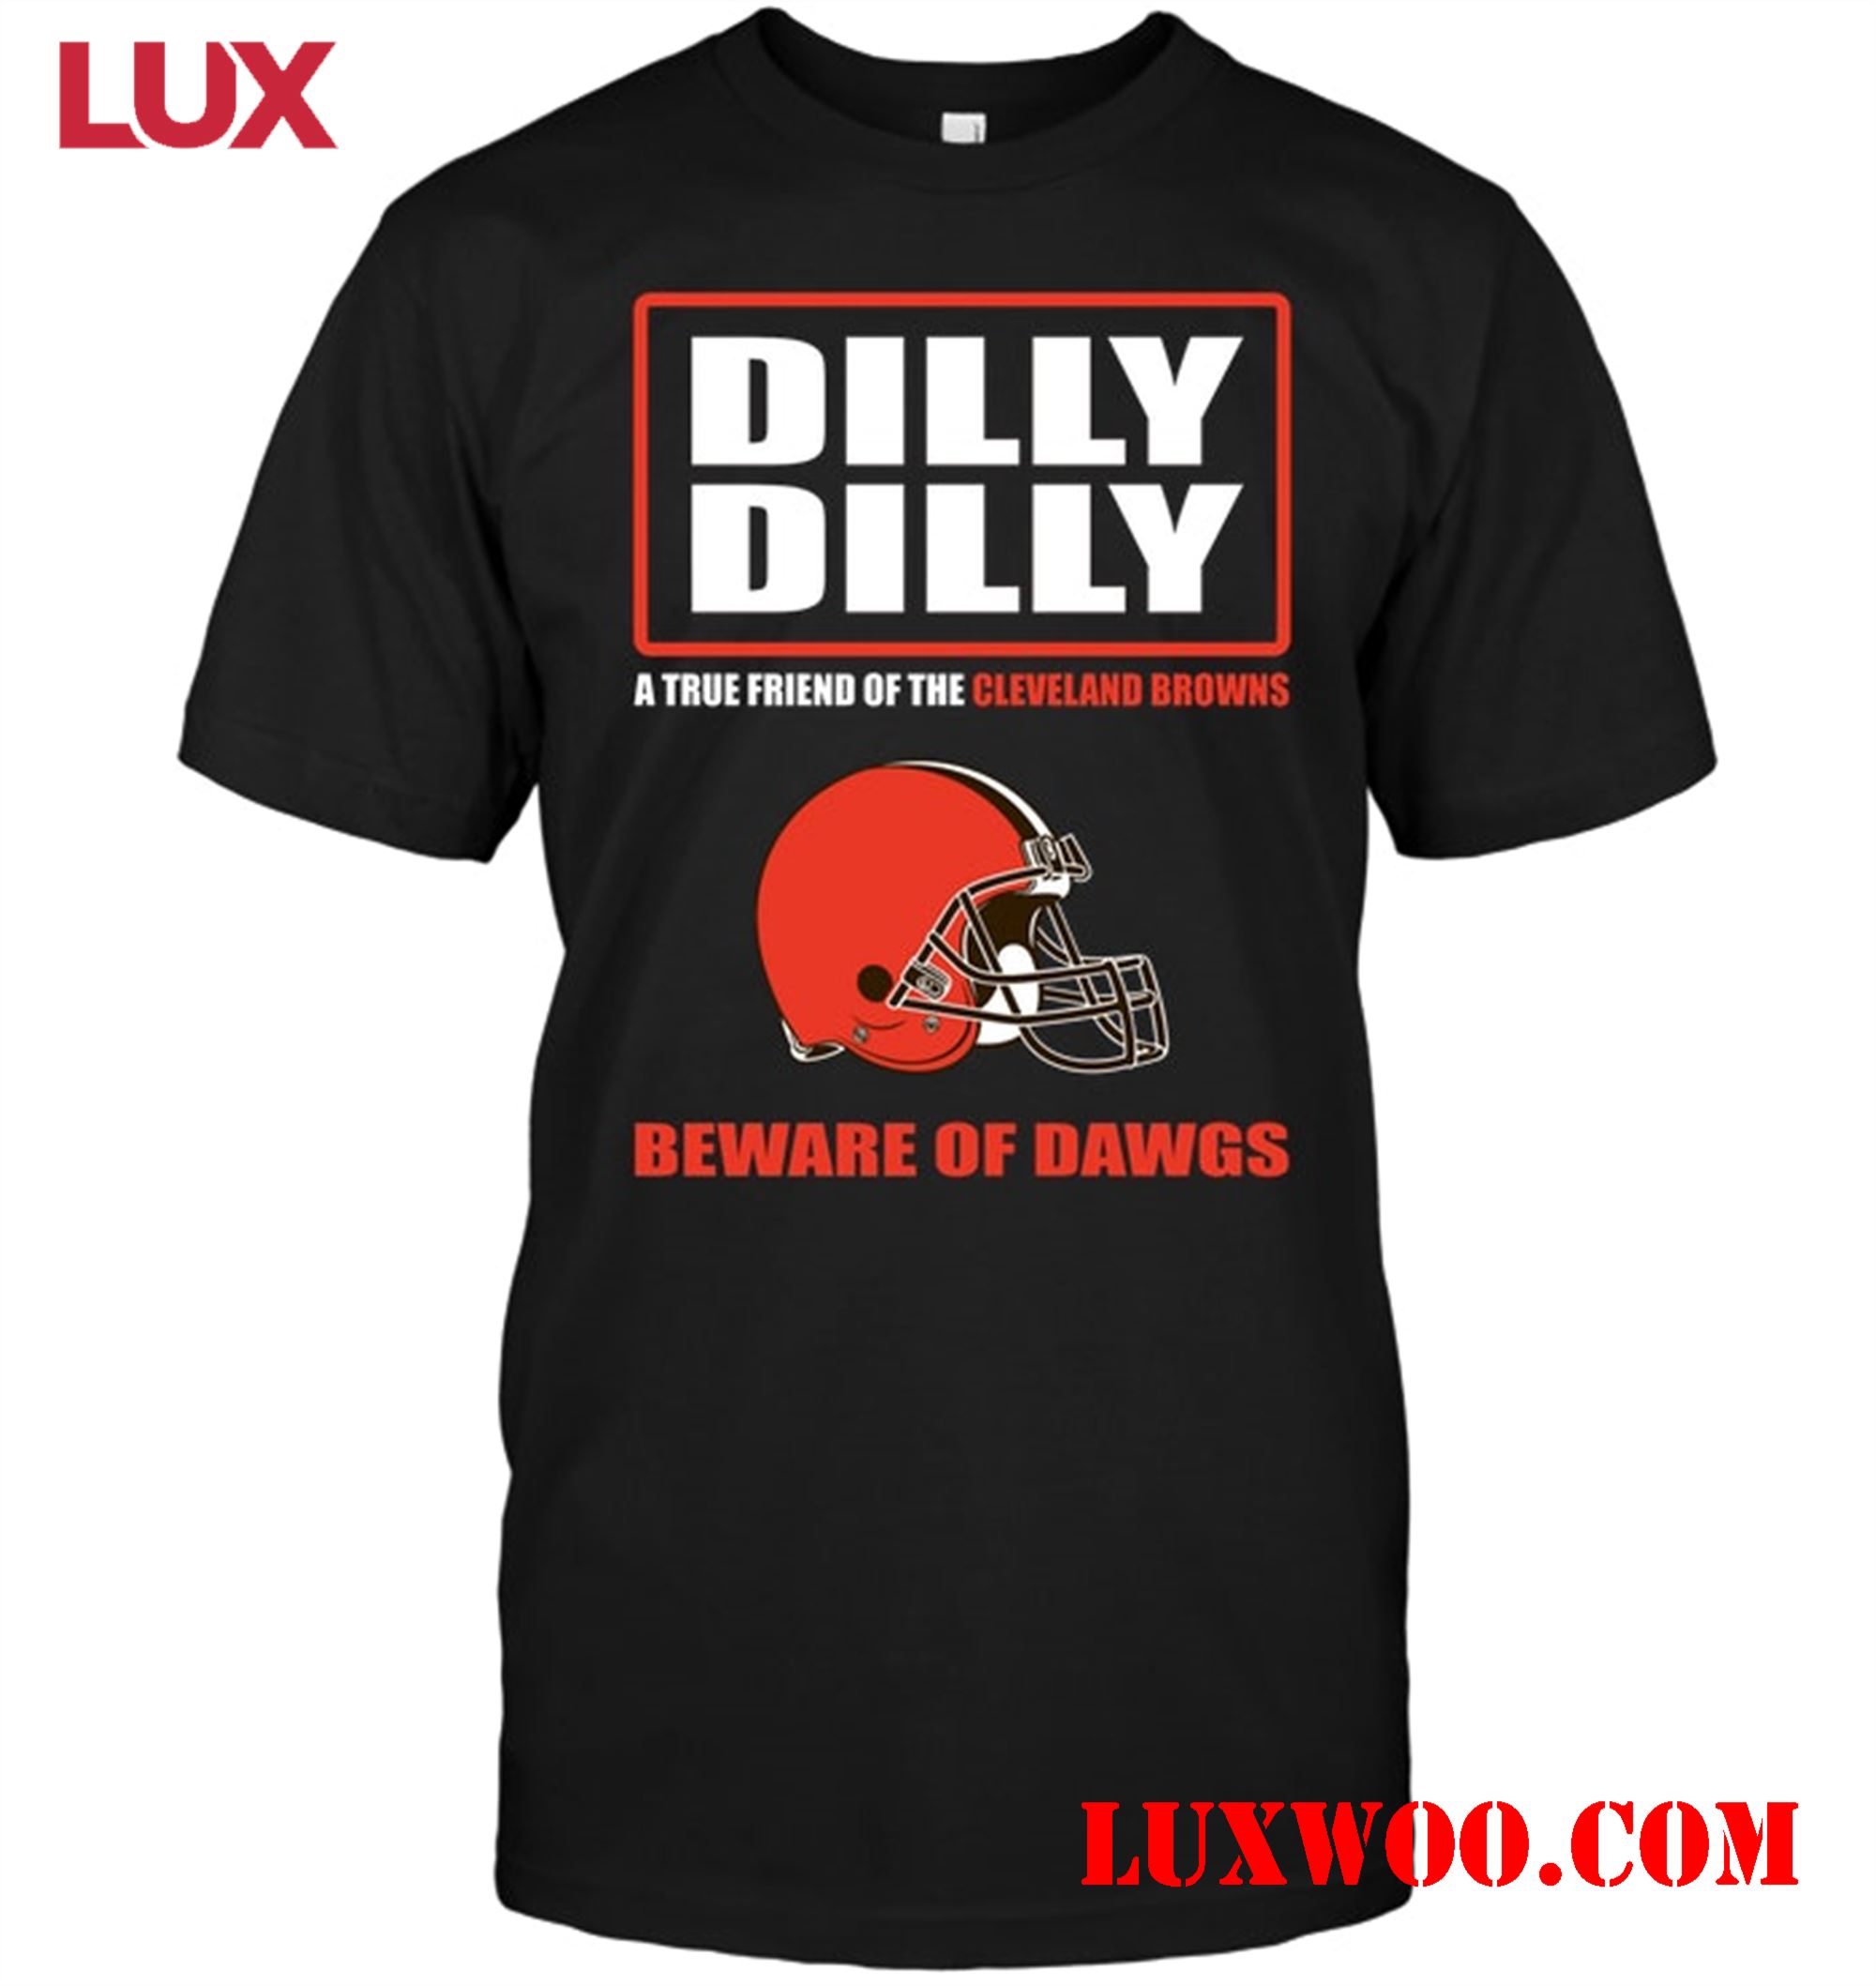 Nfl Cleveland Browns Dilly Dilly A True Friend Of The Cleveland Browns Beware Of Dawgs 